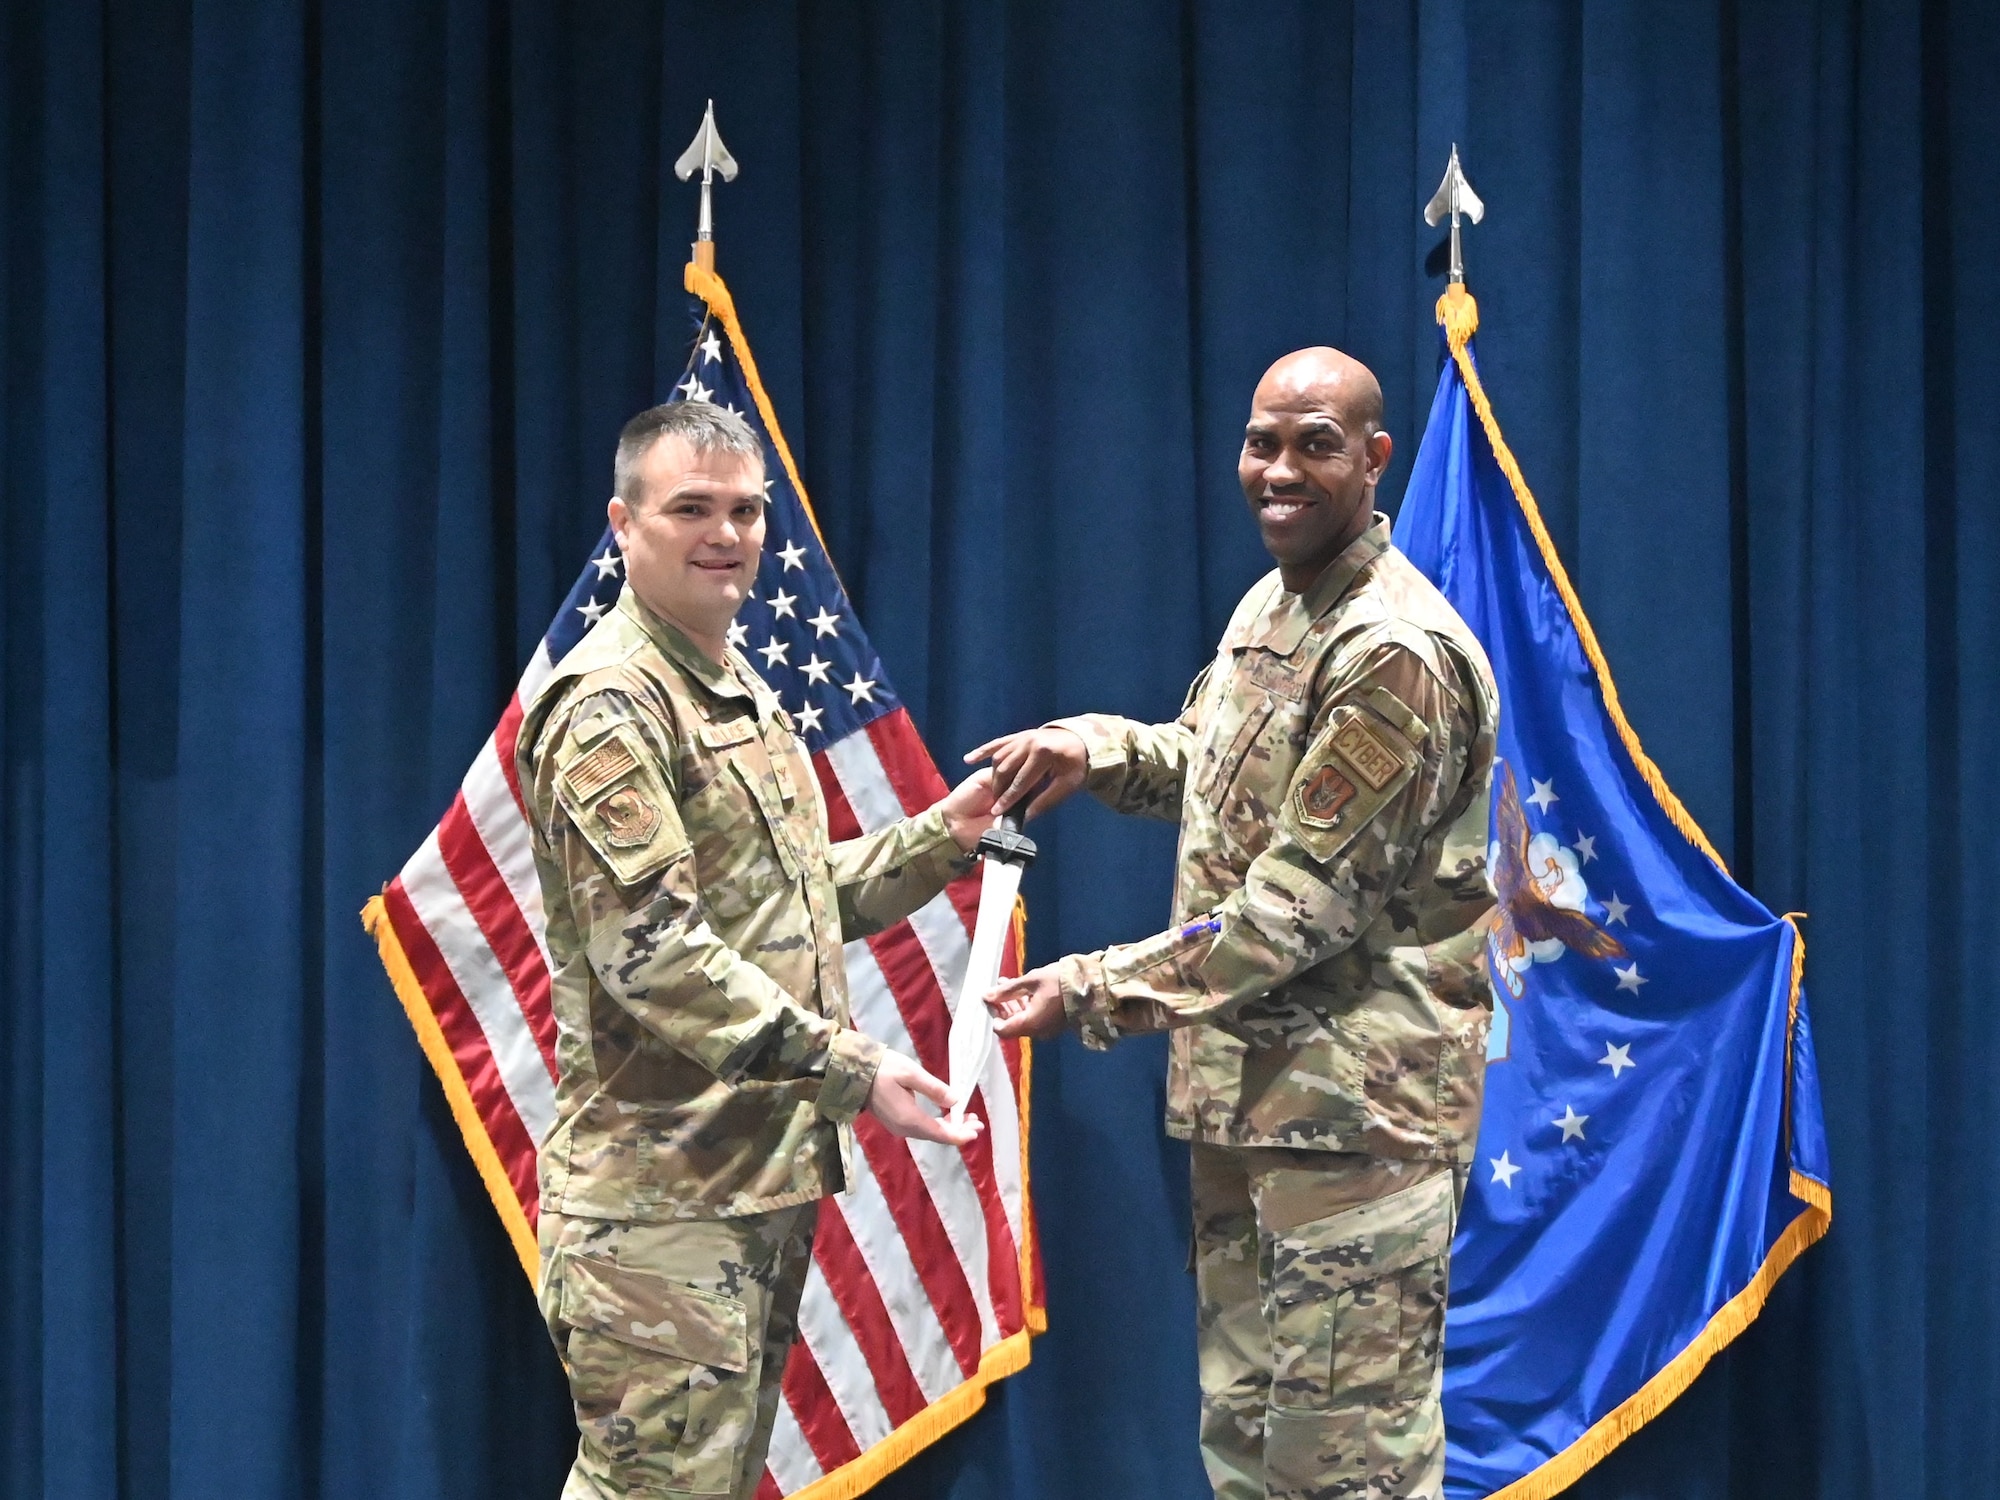 Col. Richard Wallace, 960th Cyber Operations Group commander, presents a rudis sword to Lt. Col. Jarvis Croff, outgoing commander of the 960th Operations Support Flight.